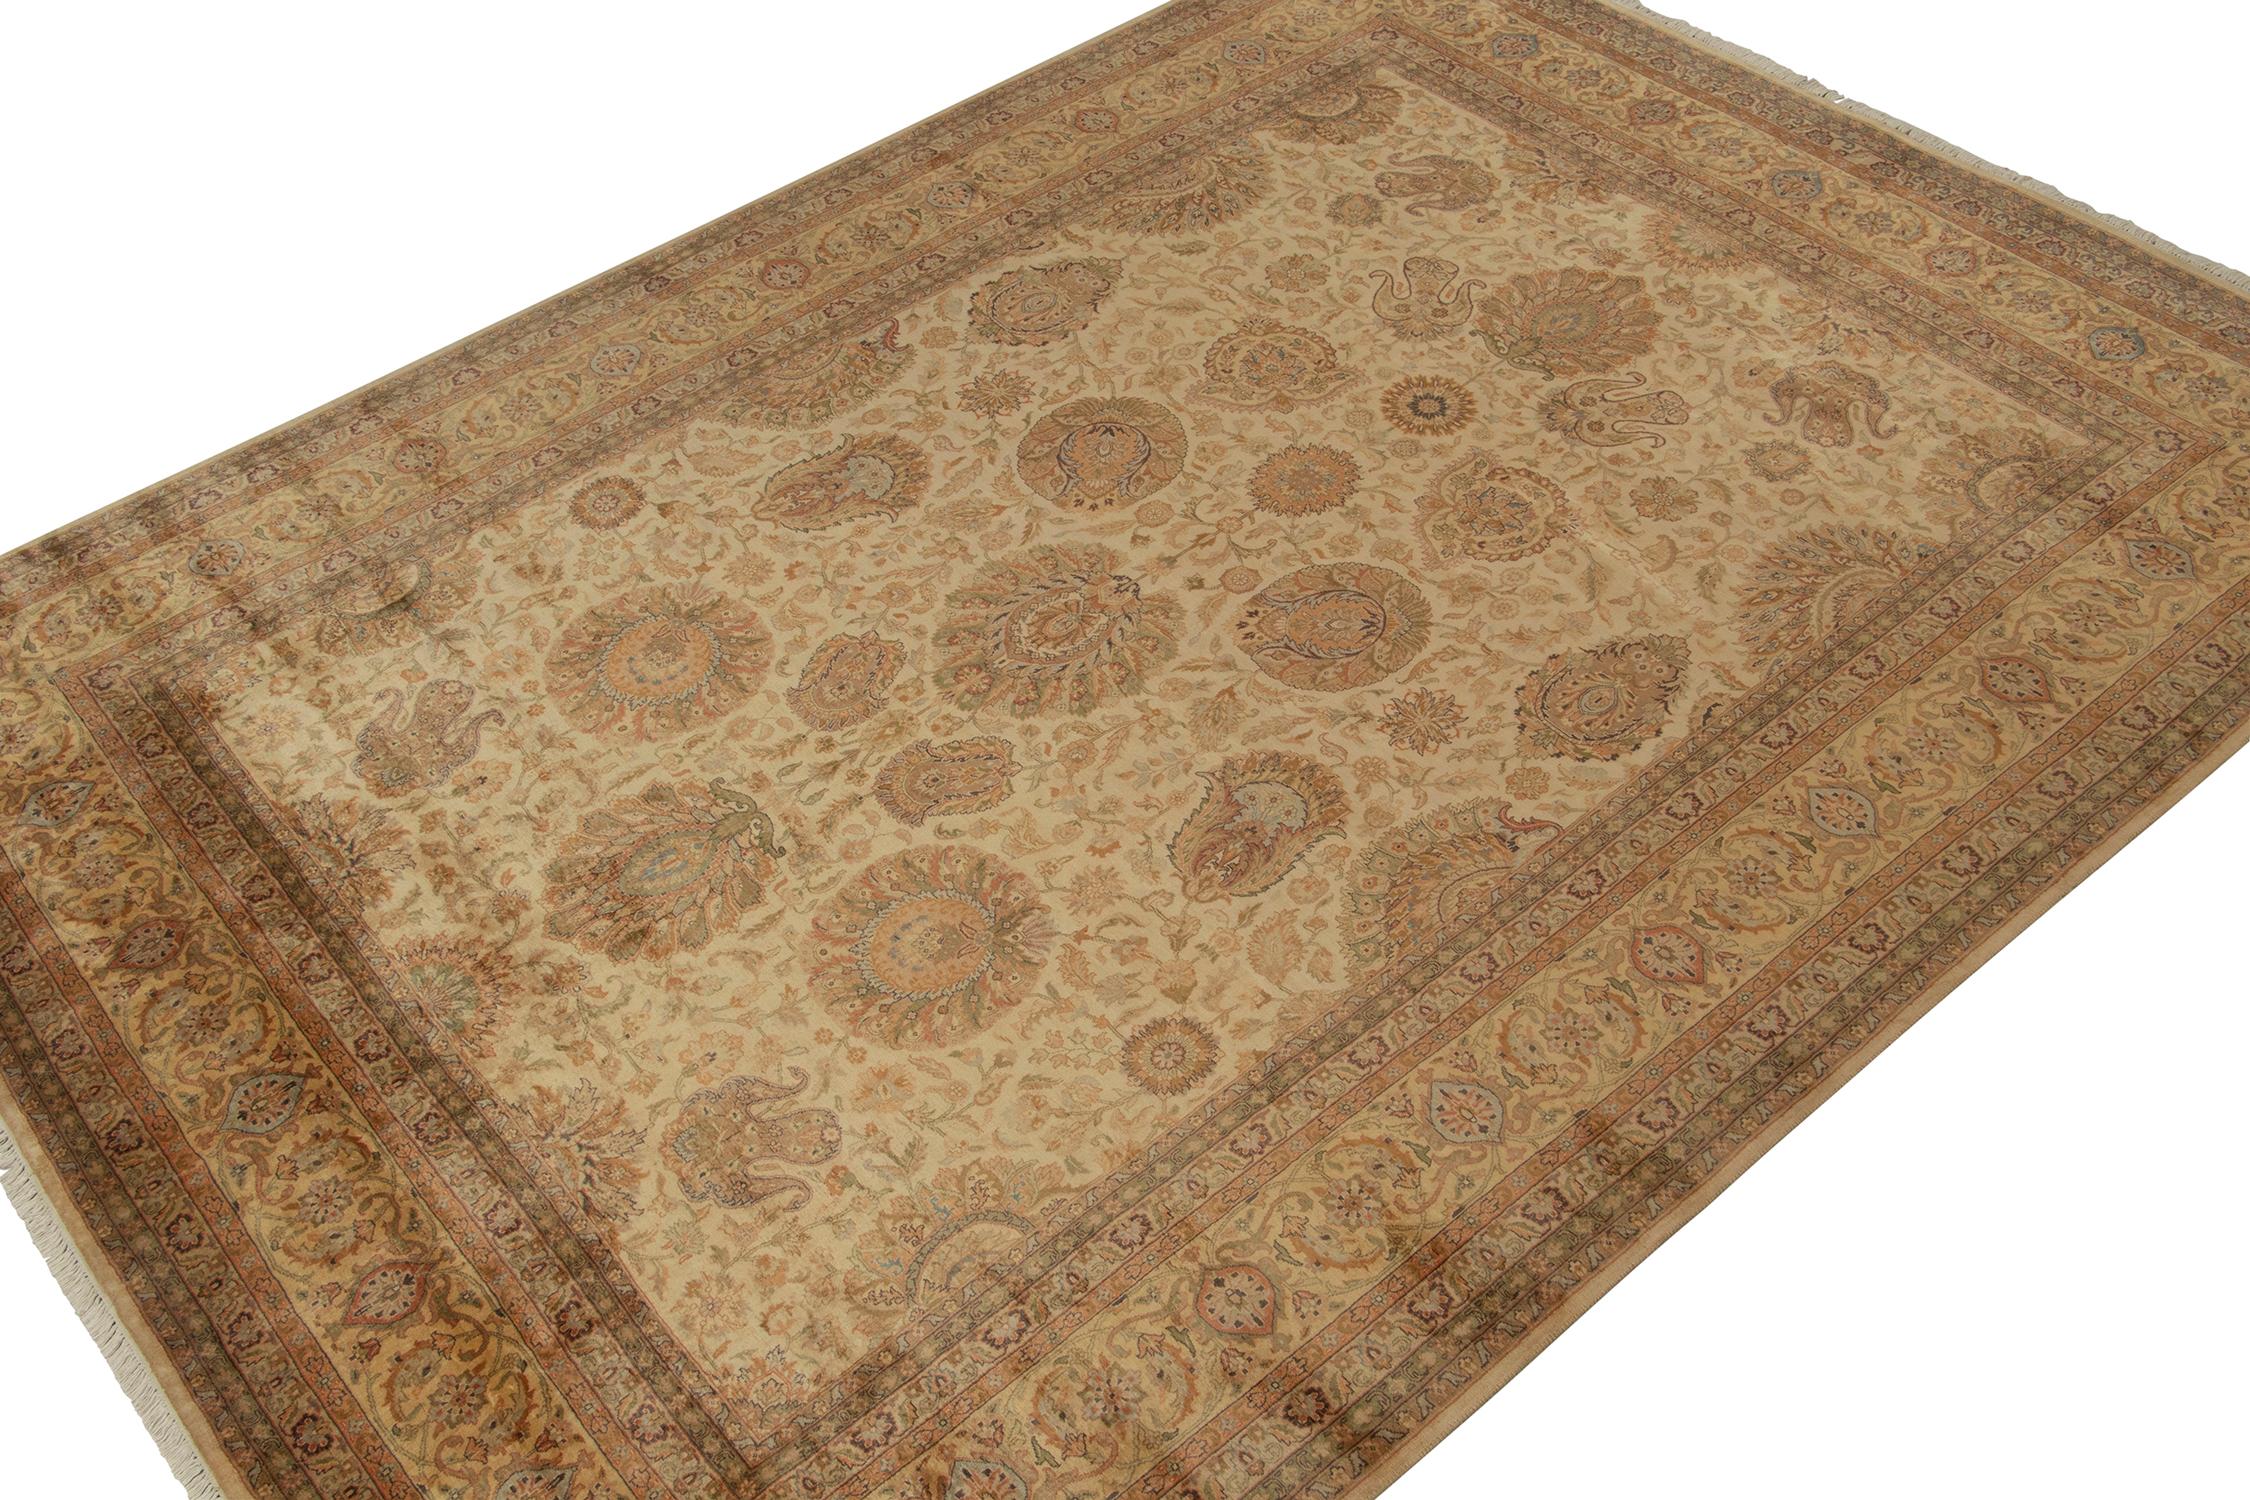 A 9x12 rug inspired from Persian rug styles, from Rug & Kilim’s Modern Classics Collection. Hand-knotted in wool, playing an exceptional gold beside beige-brown in floral patterns with classic grace.
Further On the Design:
The fine detail is a rare